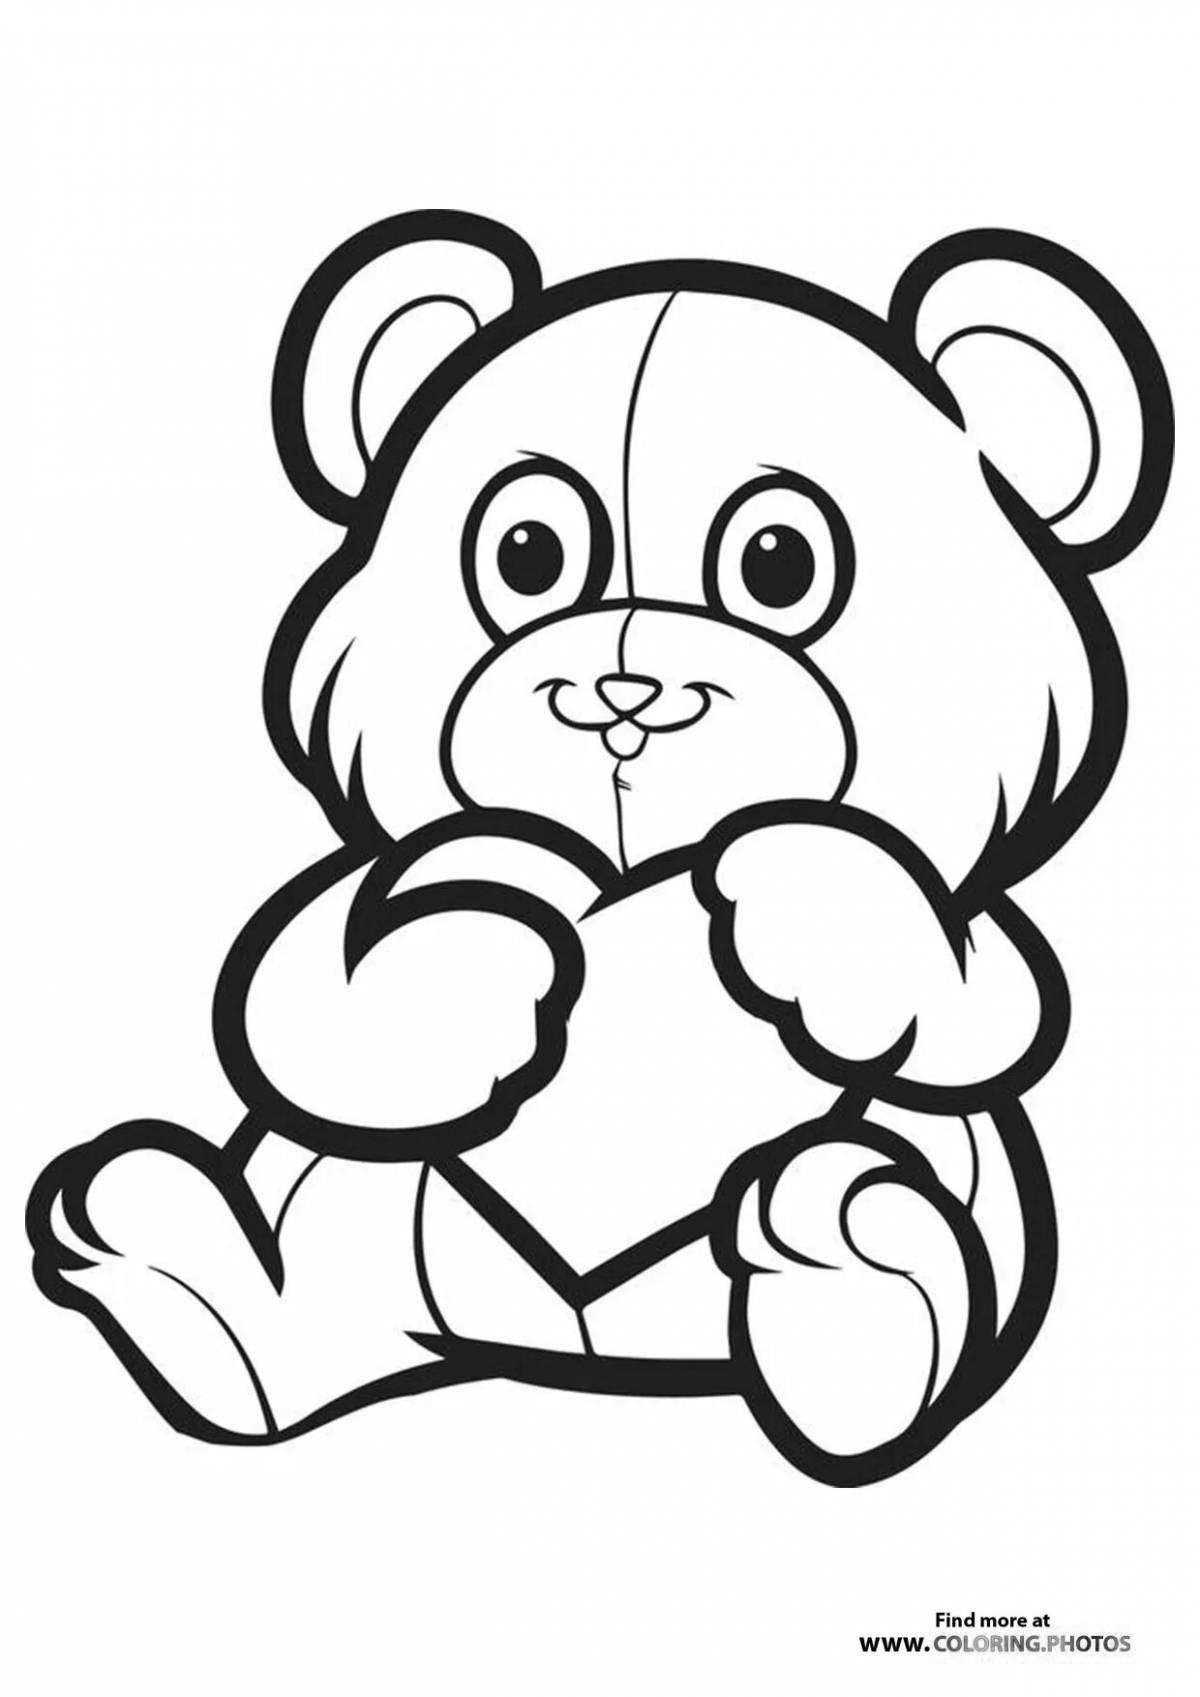 Playful pencil coloring page